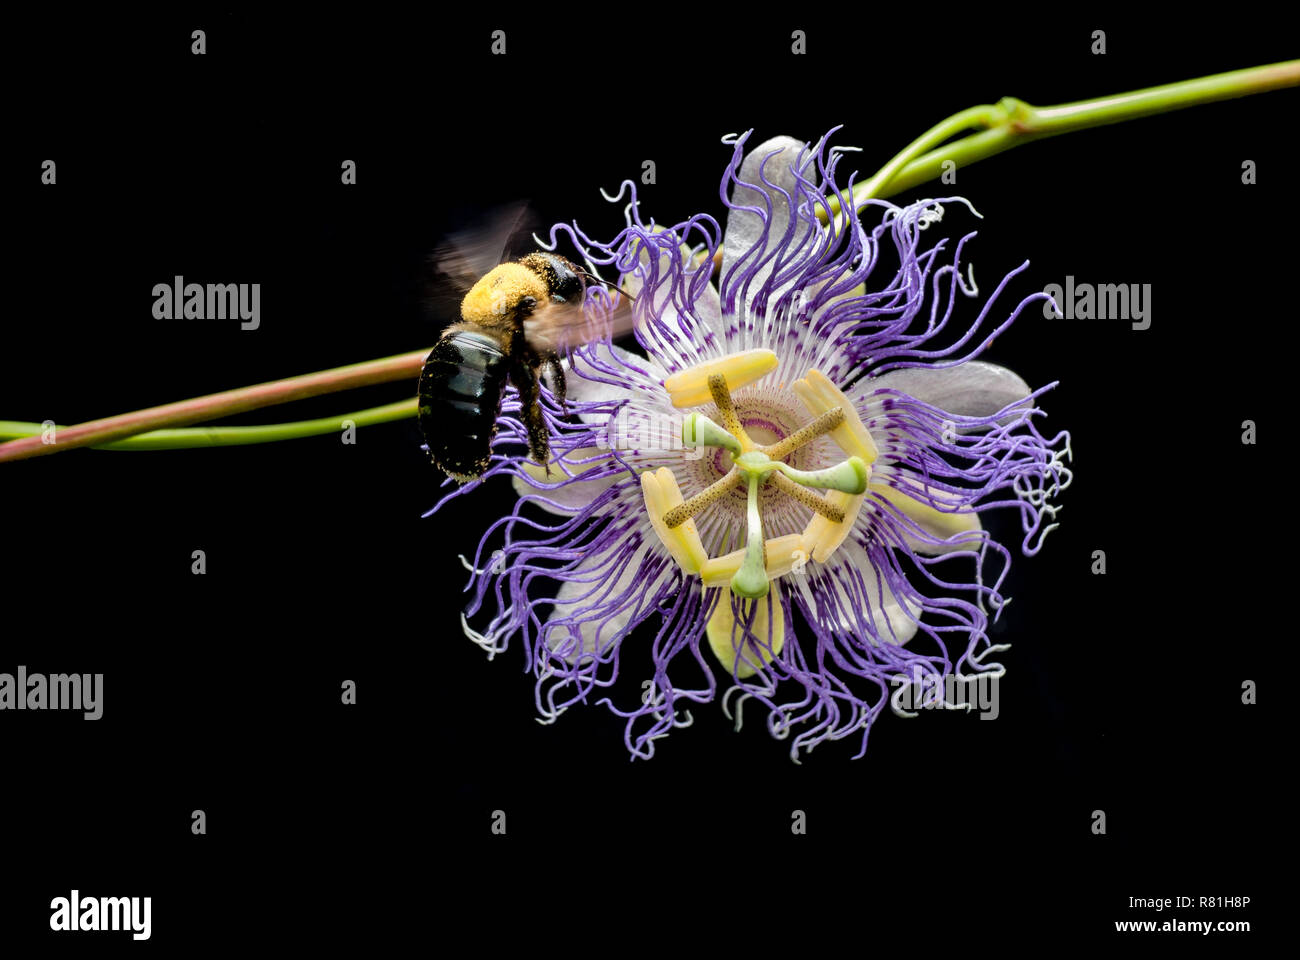 Bumble bee (Bombus sp.) approaching the blossom of a passion vine flower (Passiflora incarnata) to feed on nectar. Bumble bees and passion flowers hav Stock Photo